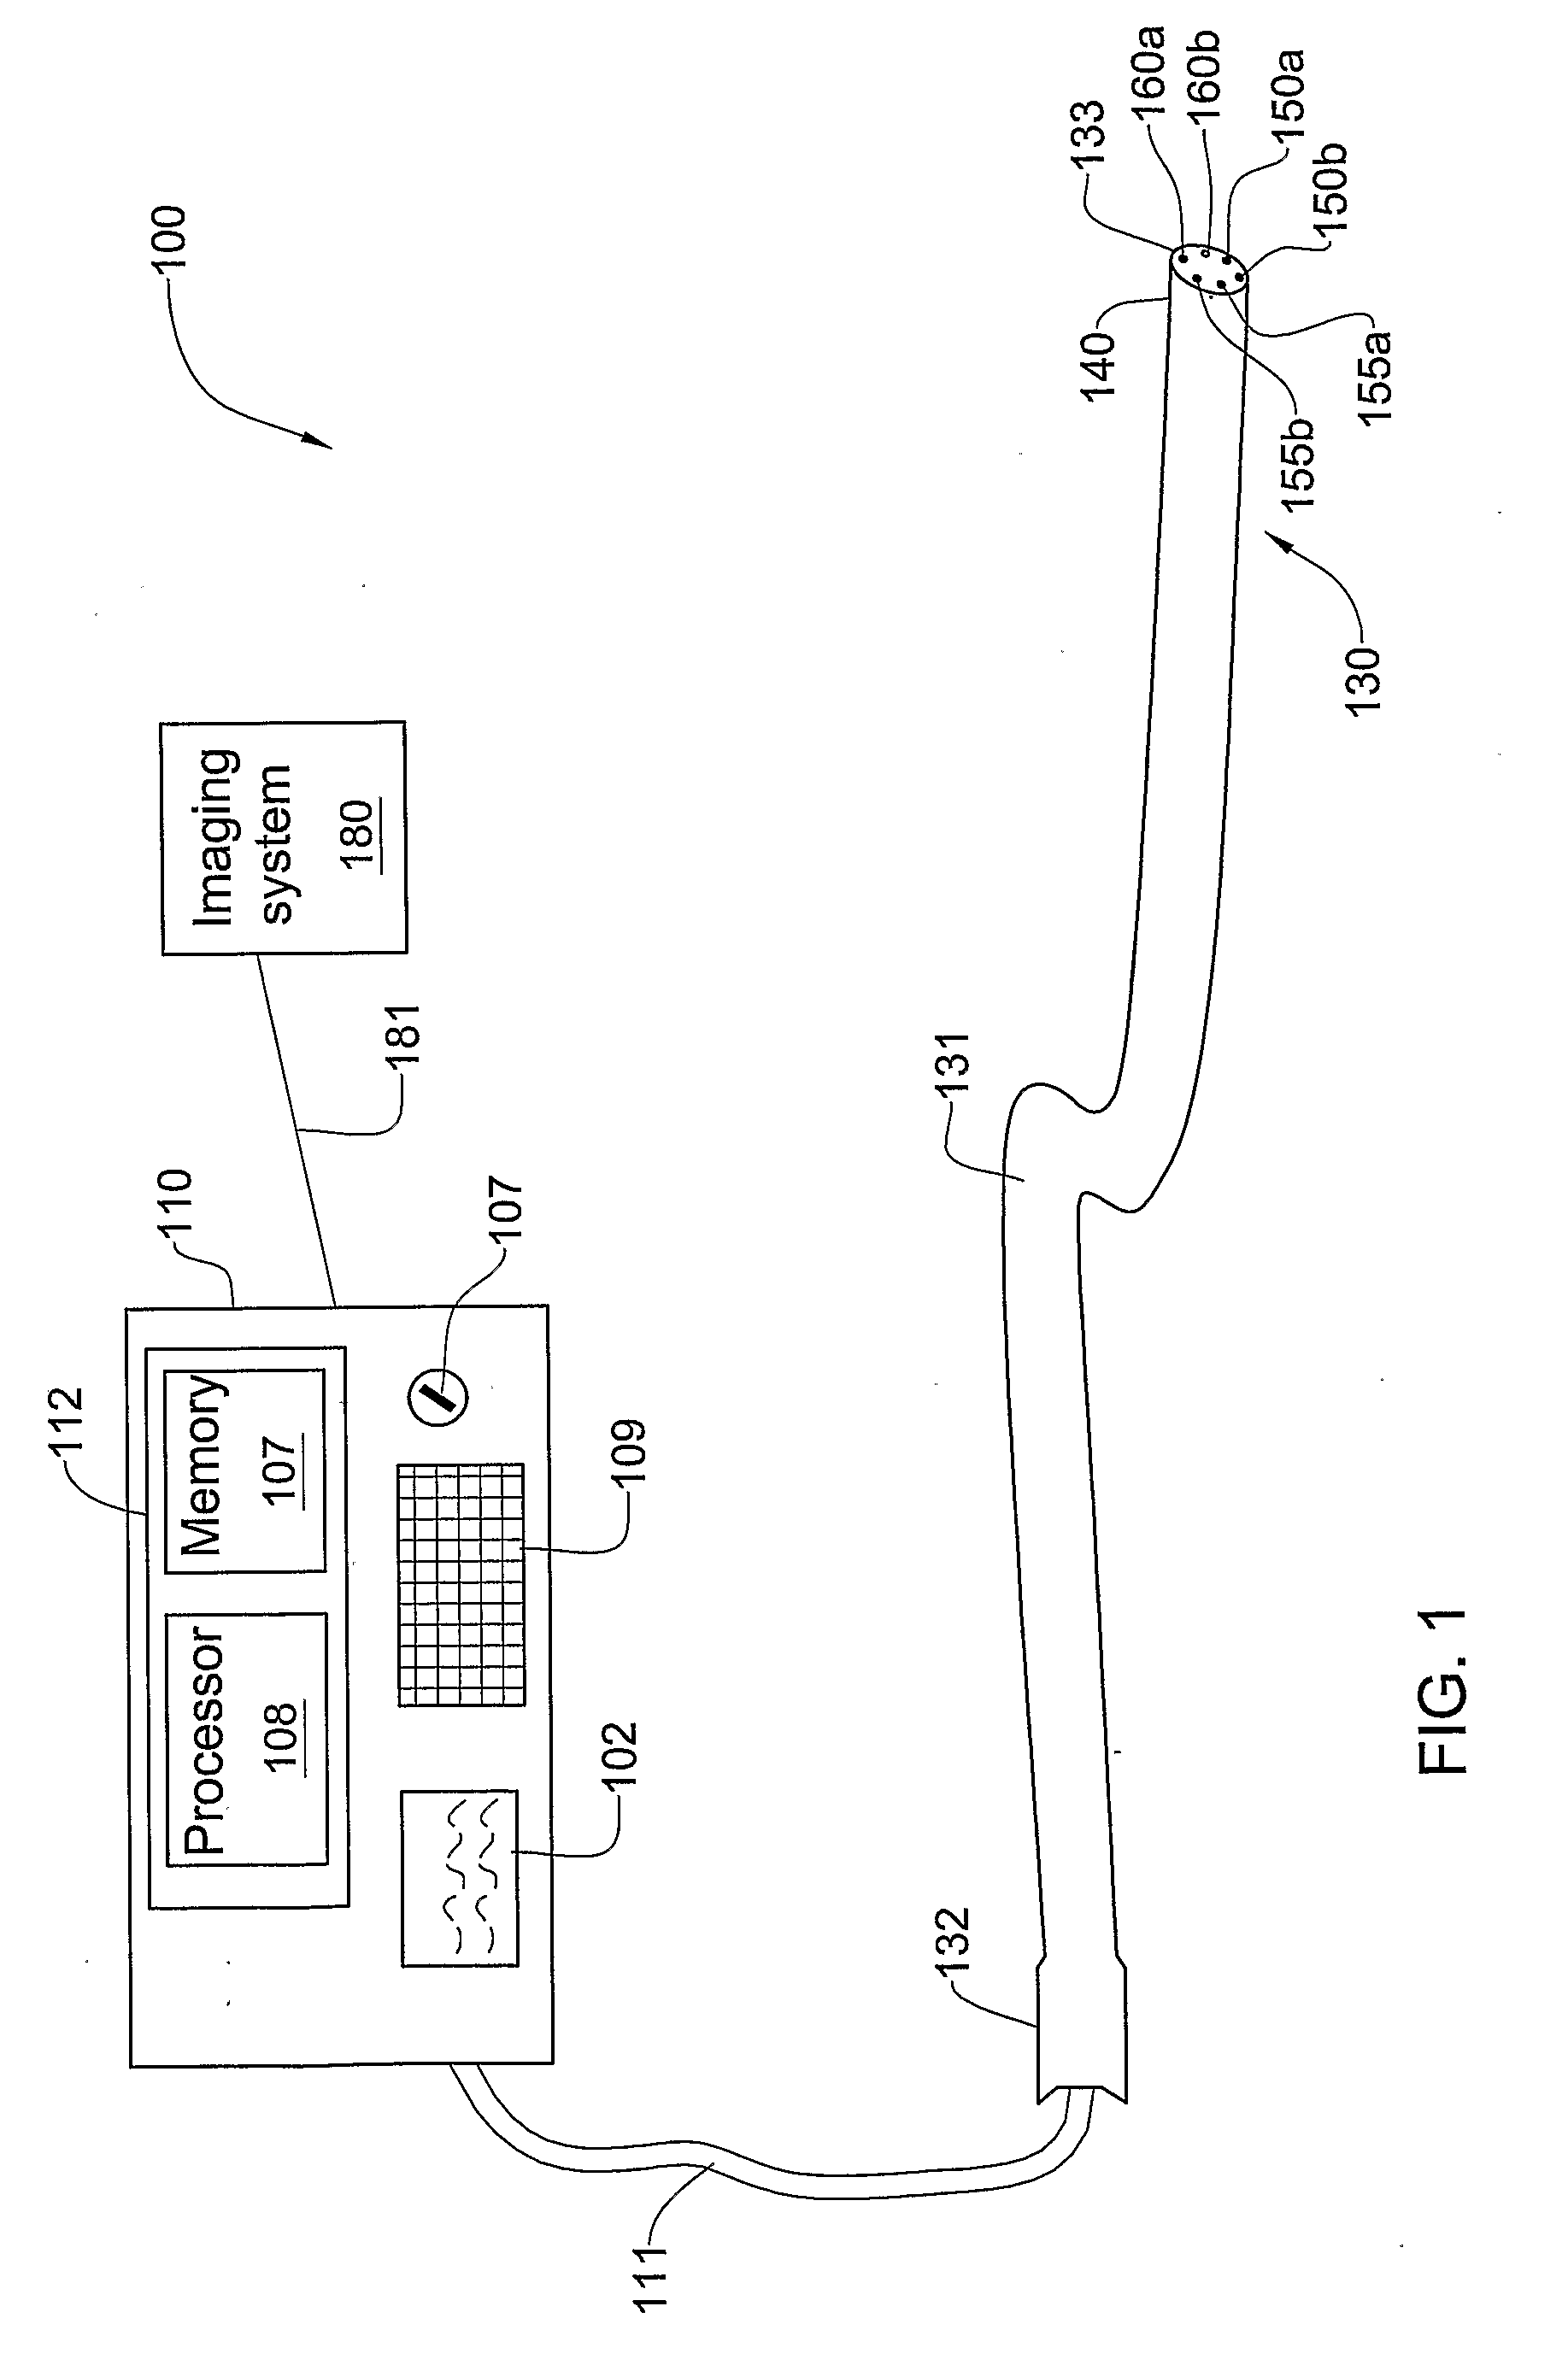 System and method for analysis and treatment of a body tissue